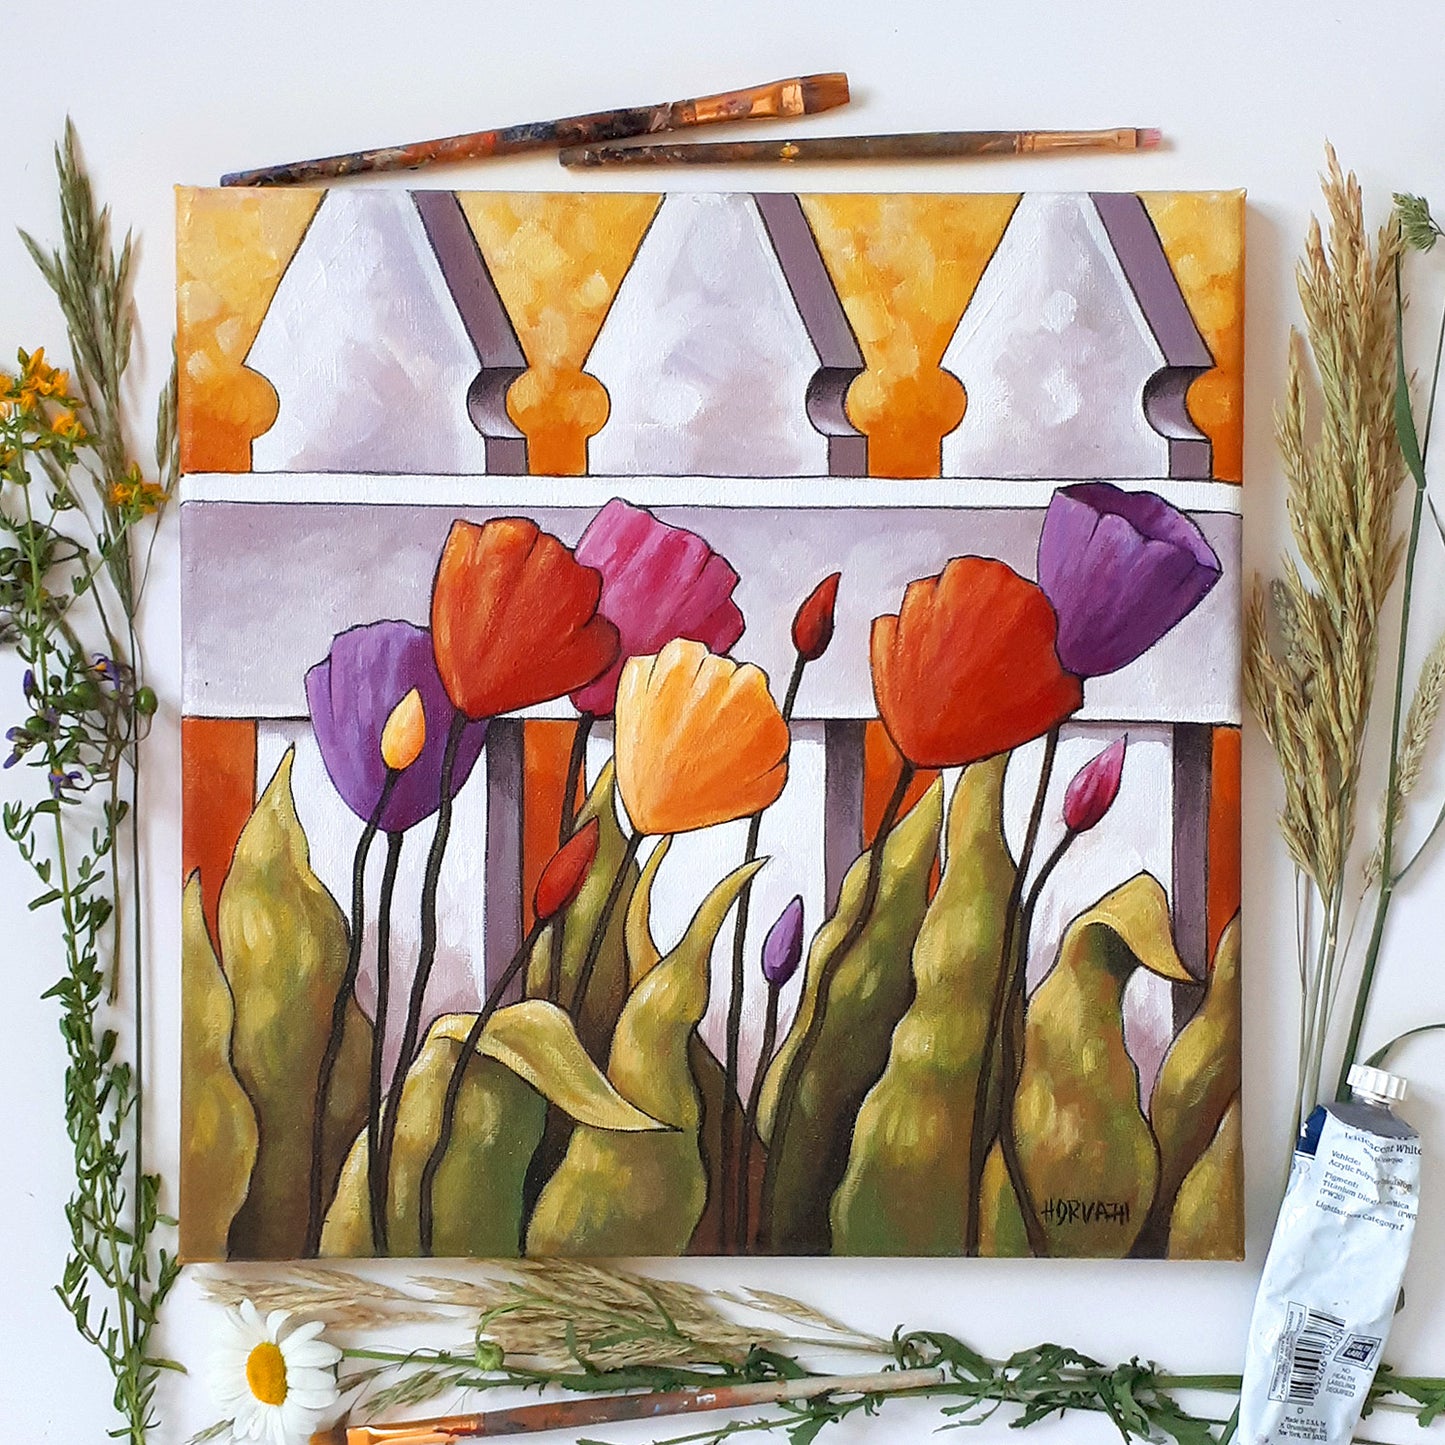 Tulips Fence I - Original Painting by artist cathy horvath buchanan